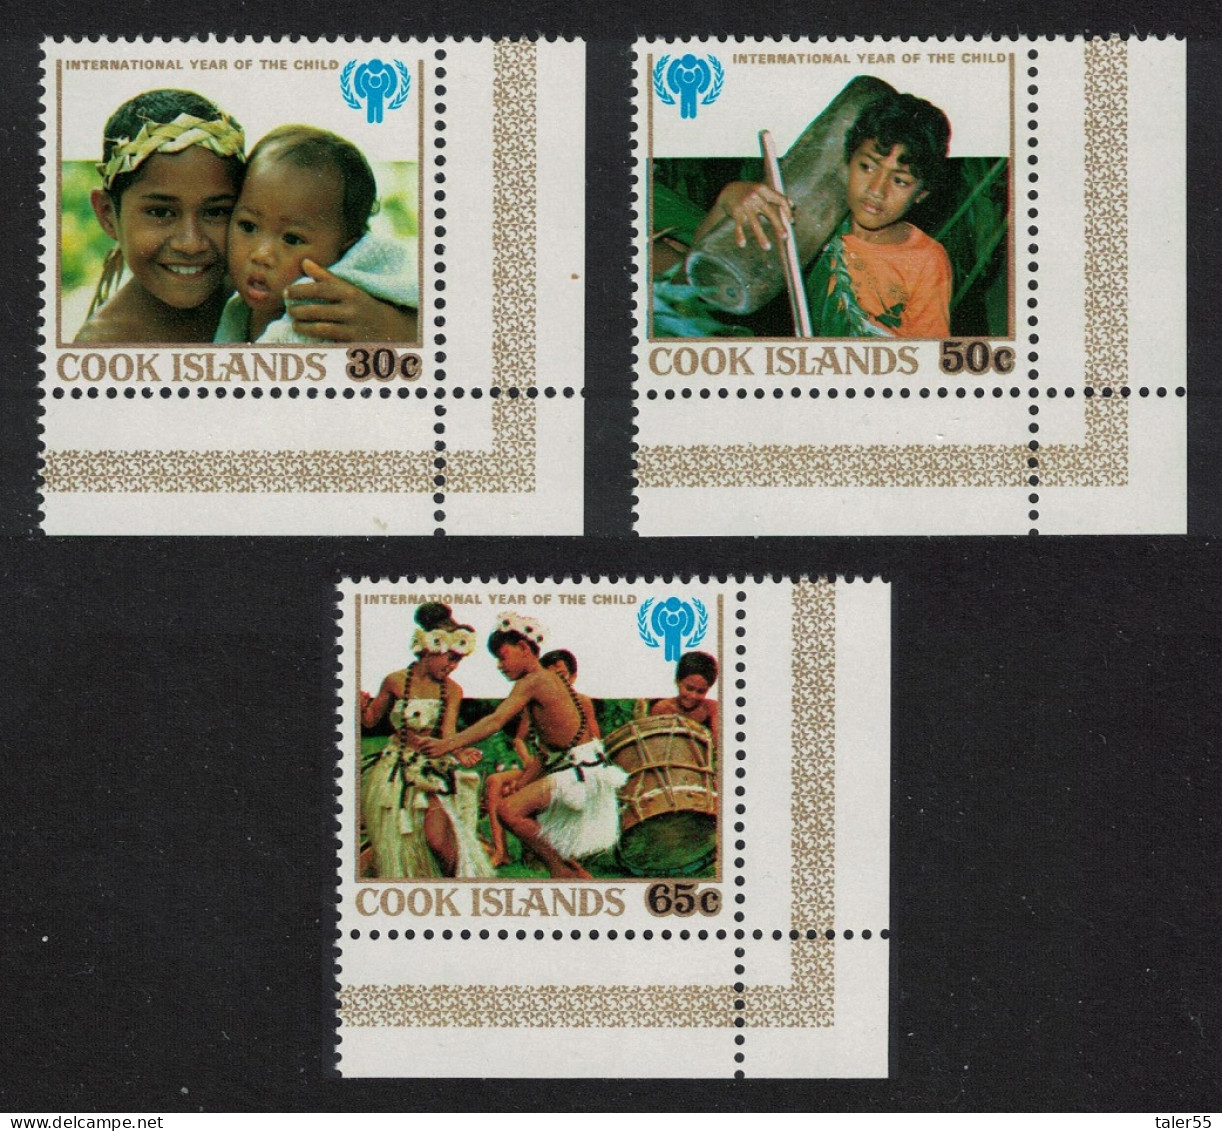 Cook Is. International Year Of The Child 3v Corners 1979 MNH SG#649-651 - Islas Cook